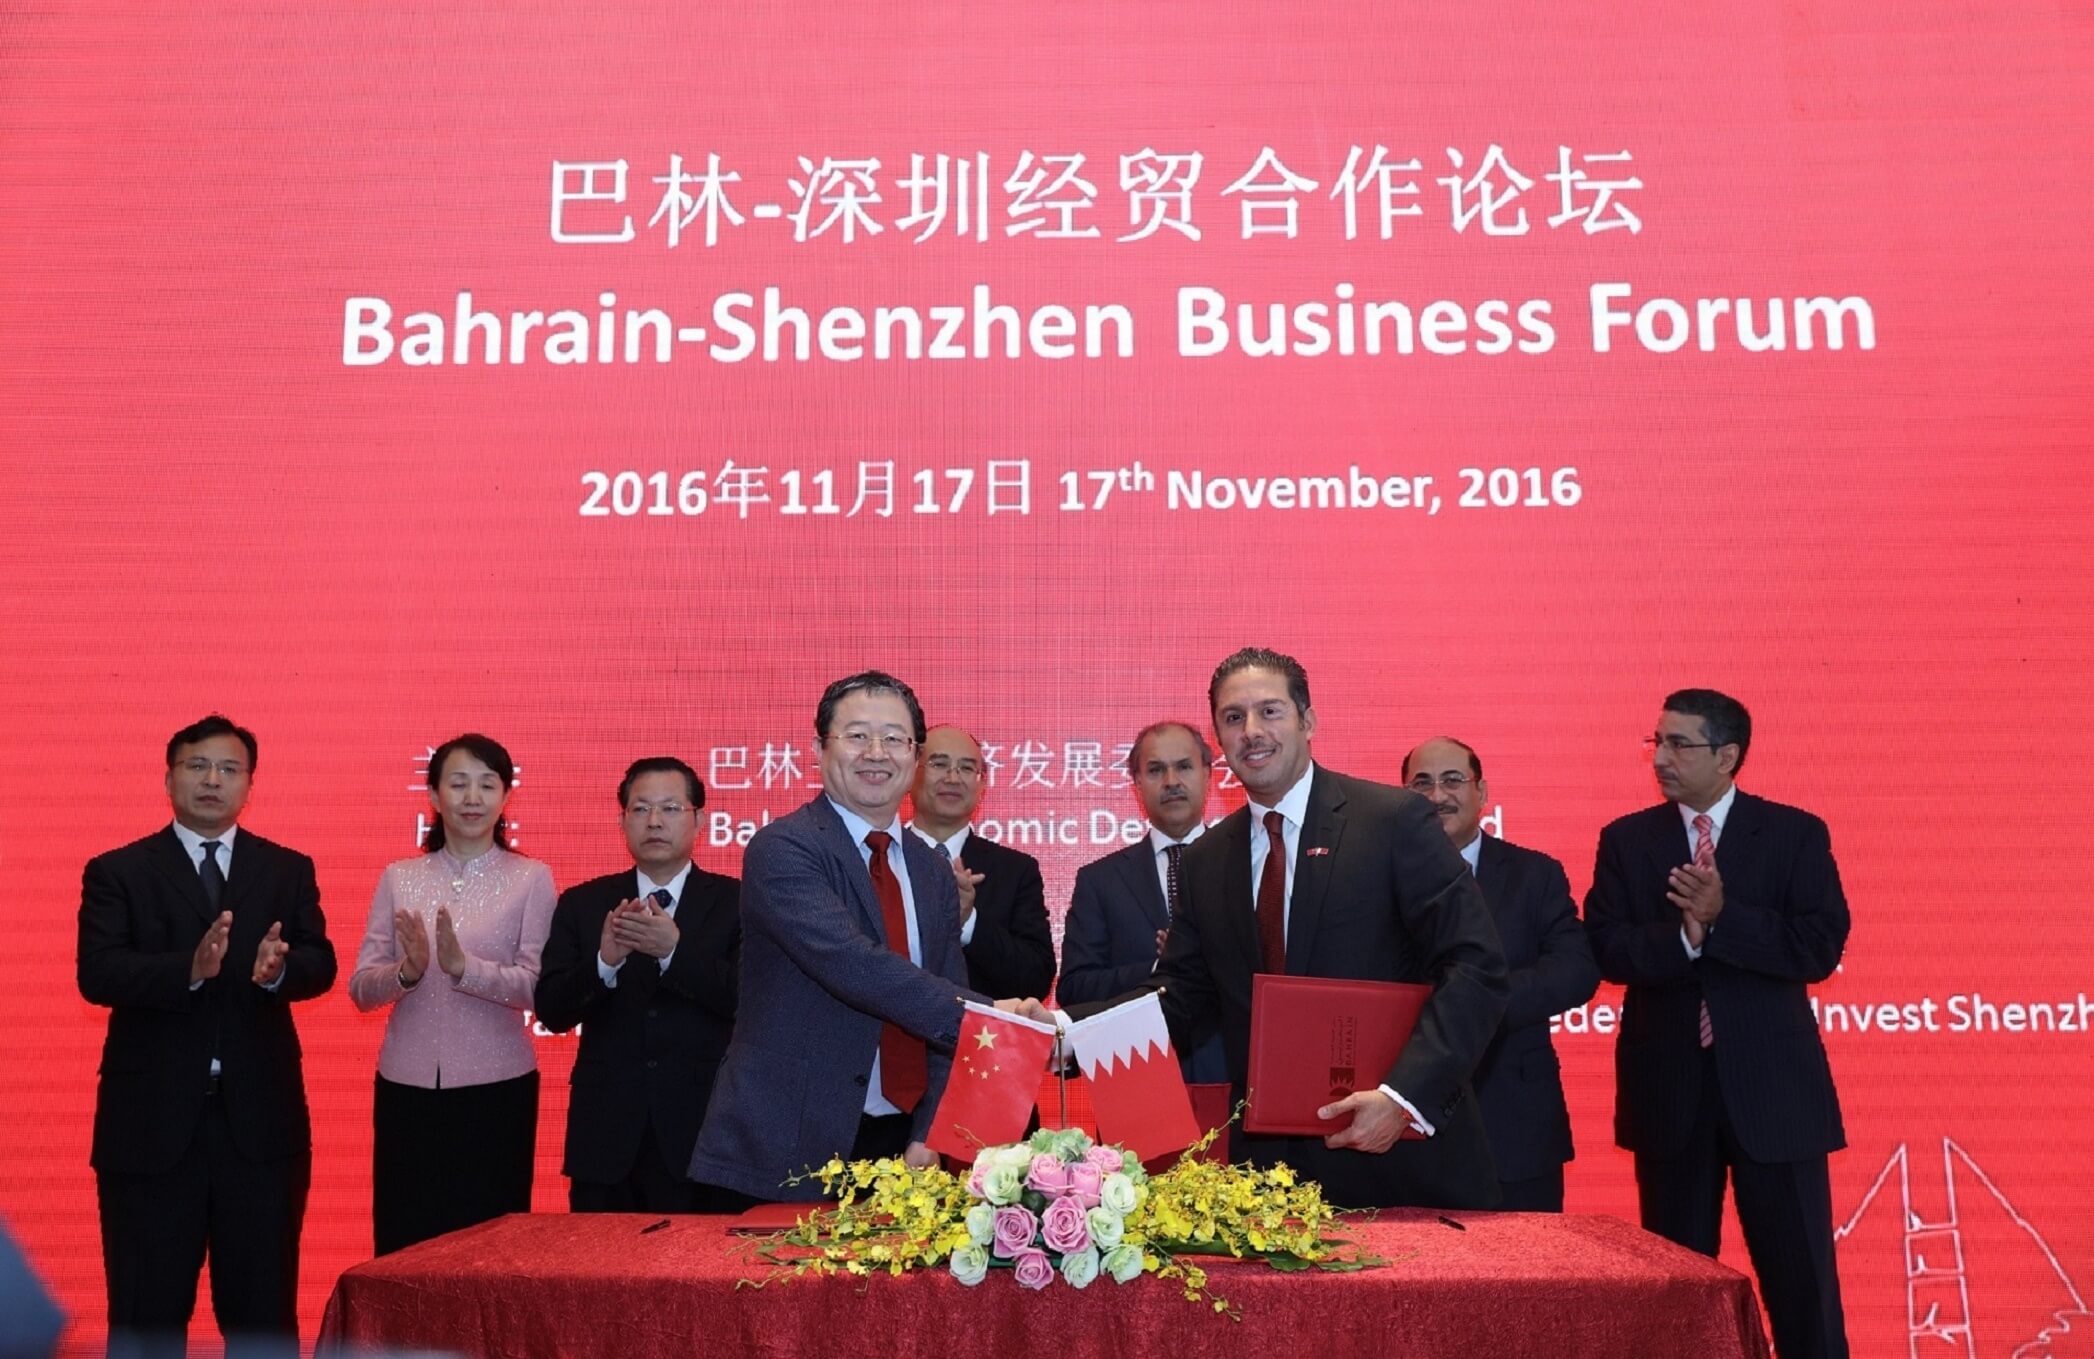 Bahrain and Shenzhen businesses build stronger ties at forum